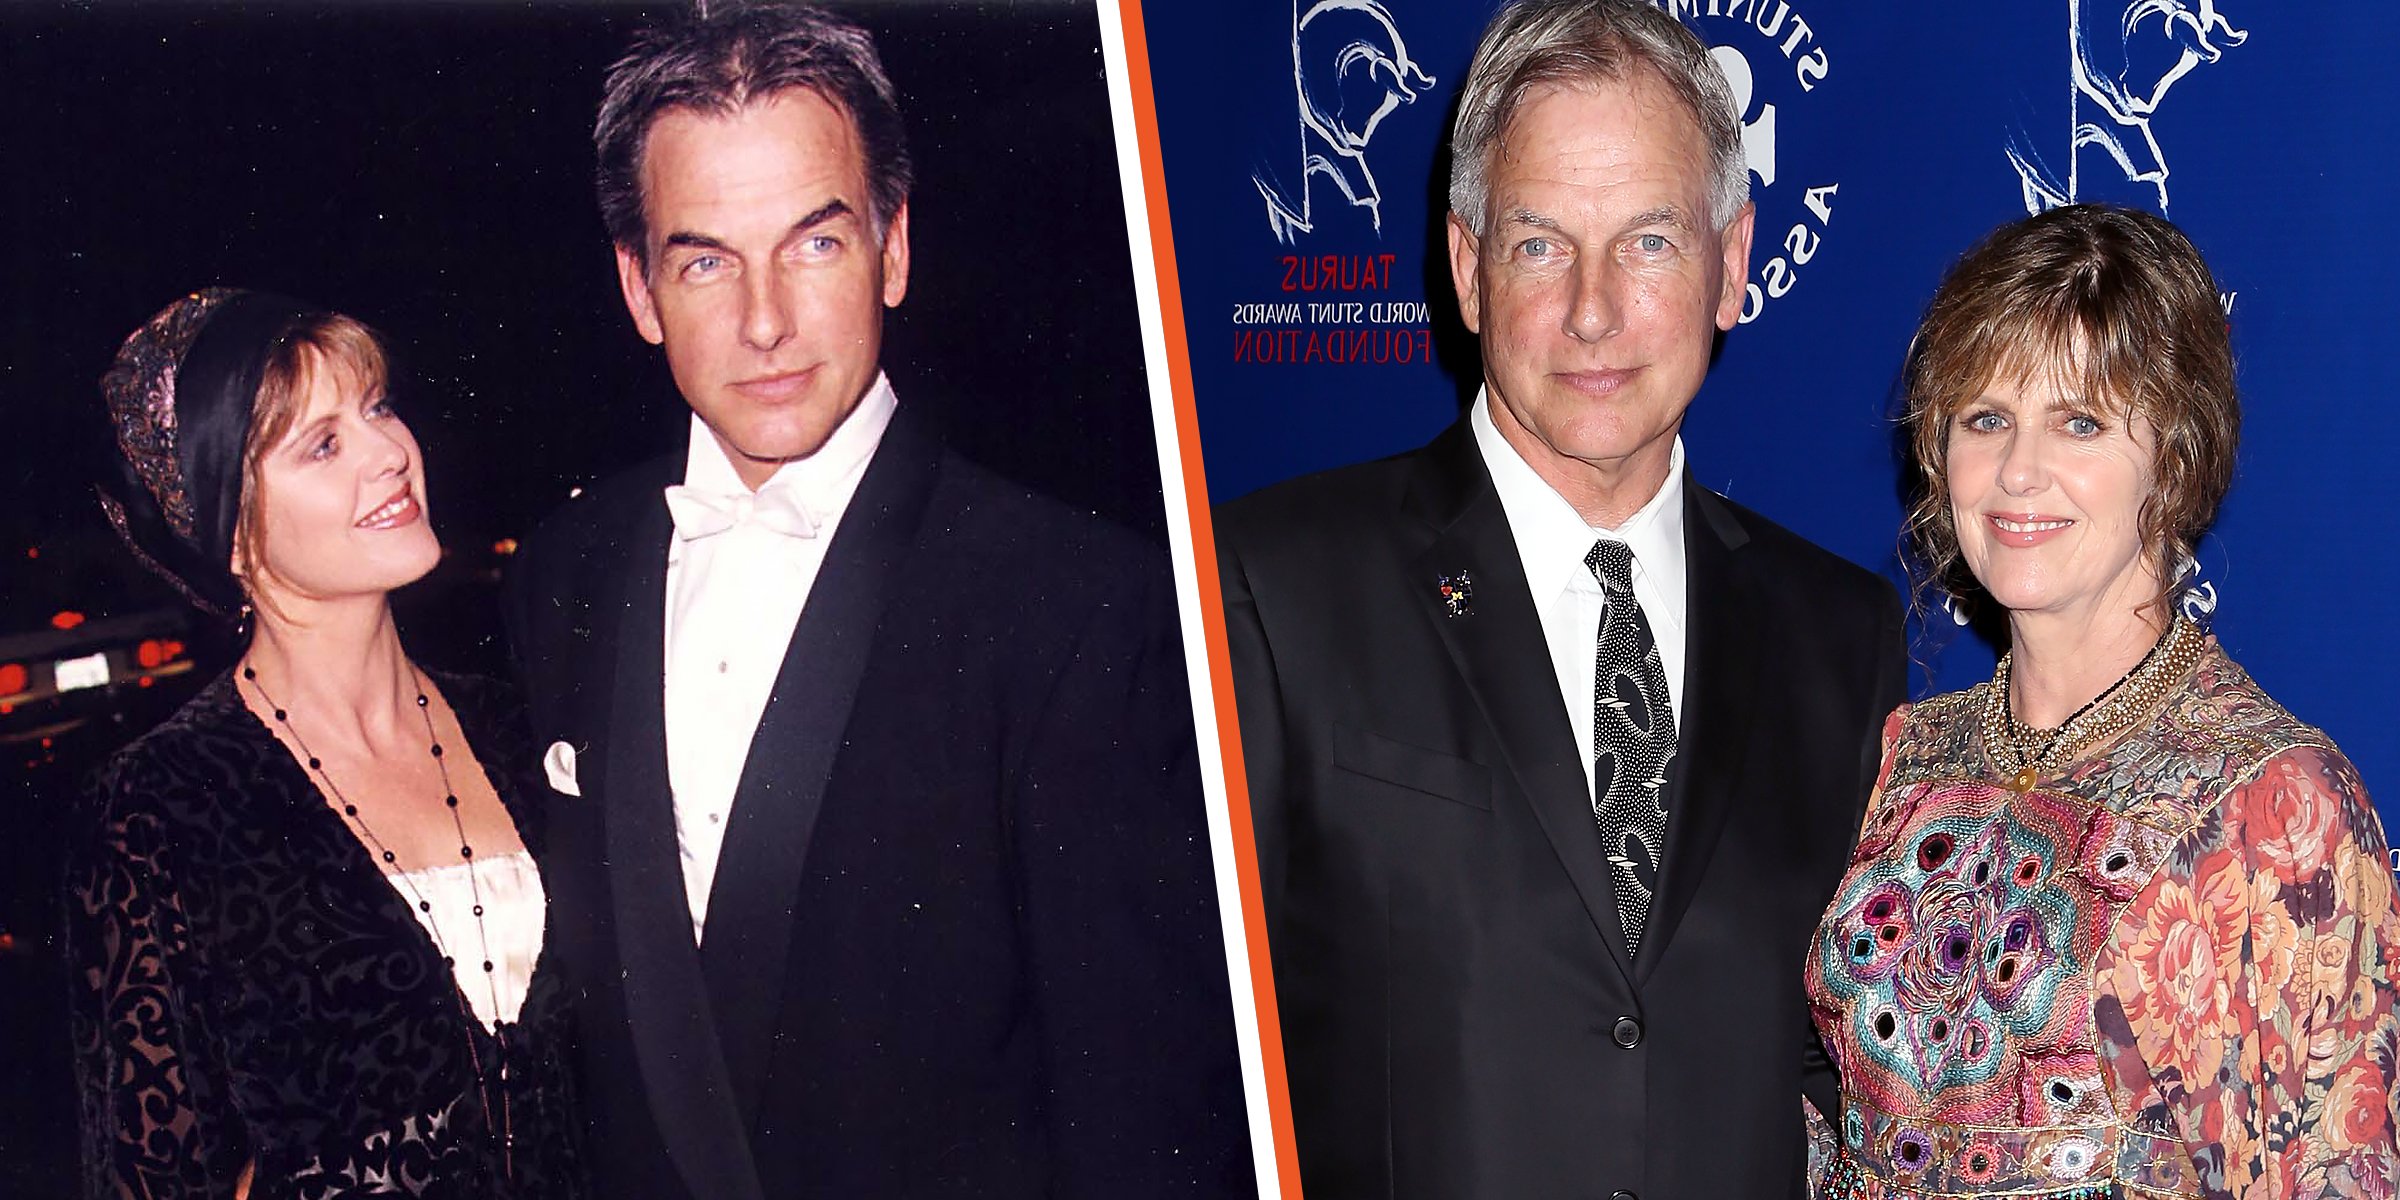 Paw Dawber and Mark Harmon | Mark Harmon and Paw Dawber | Source: Getty Images